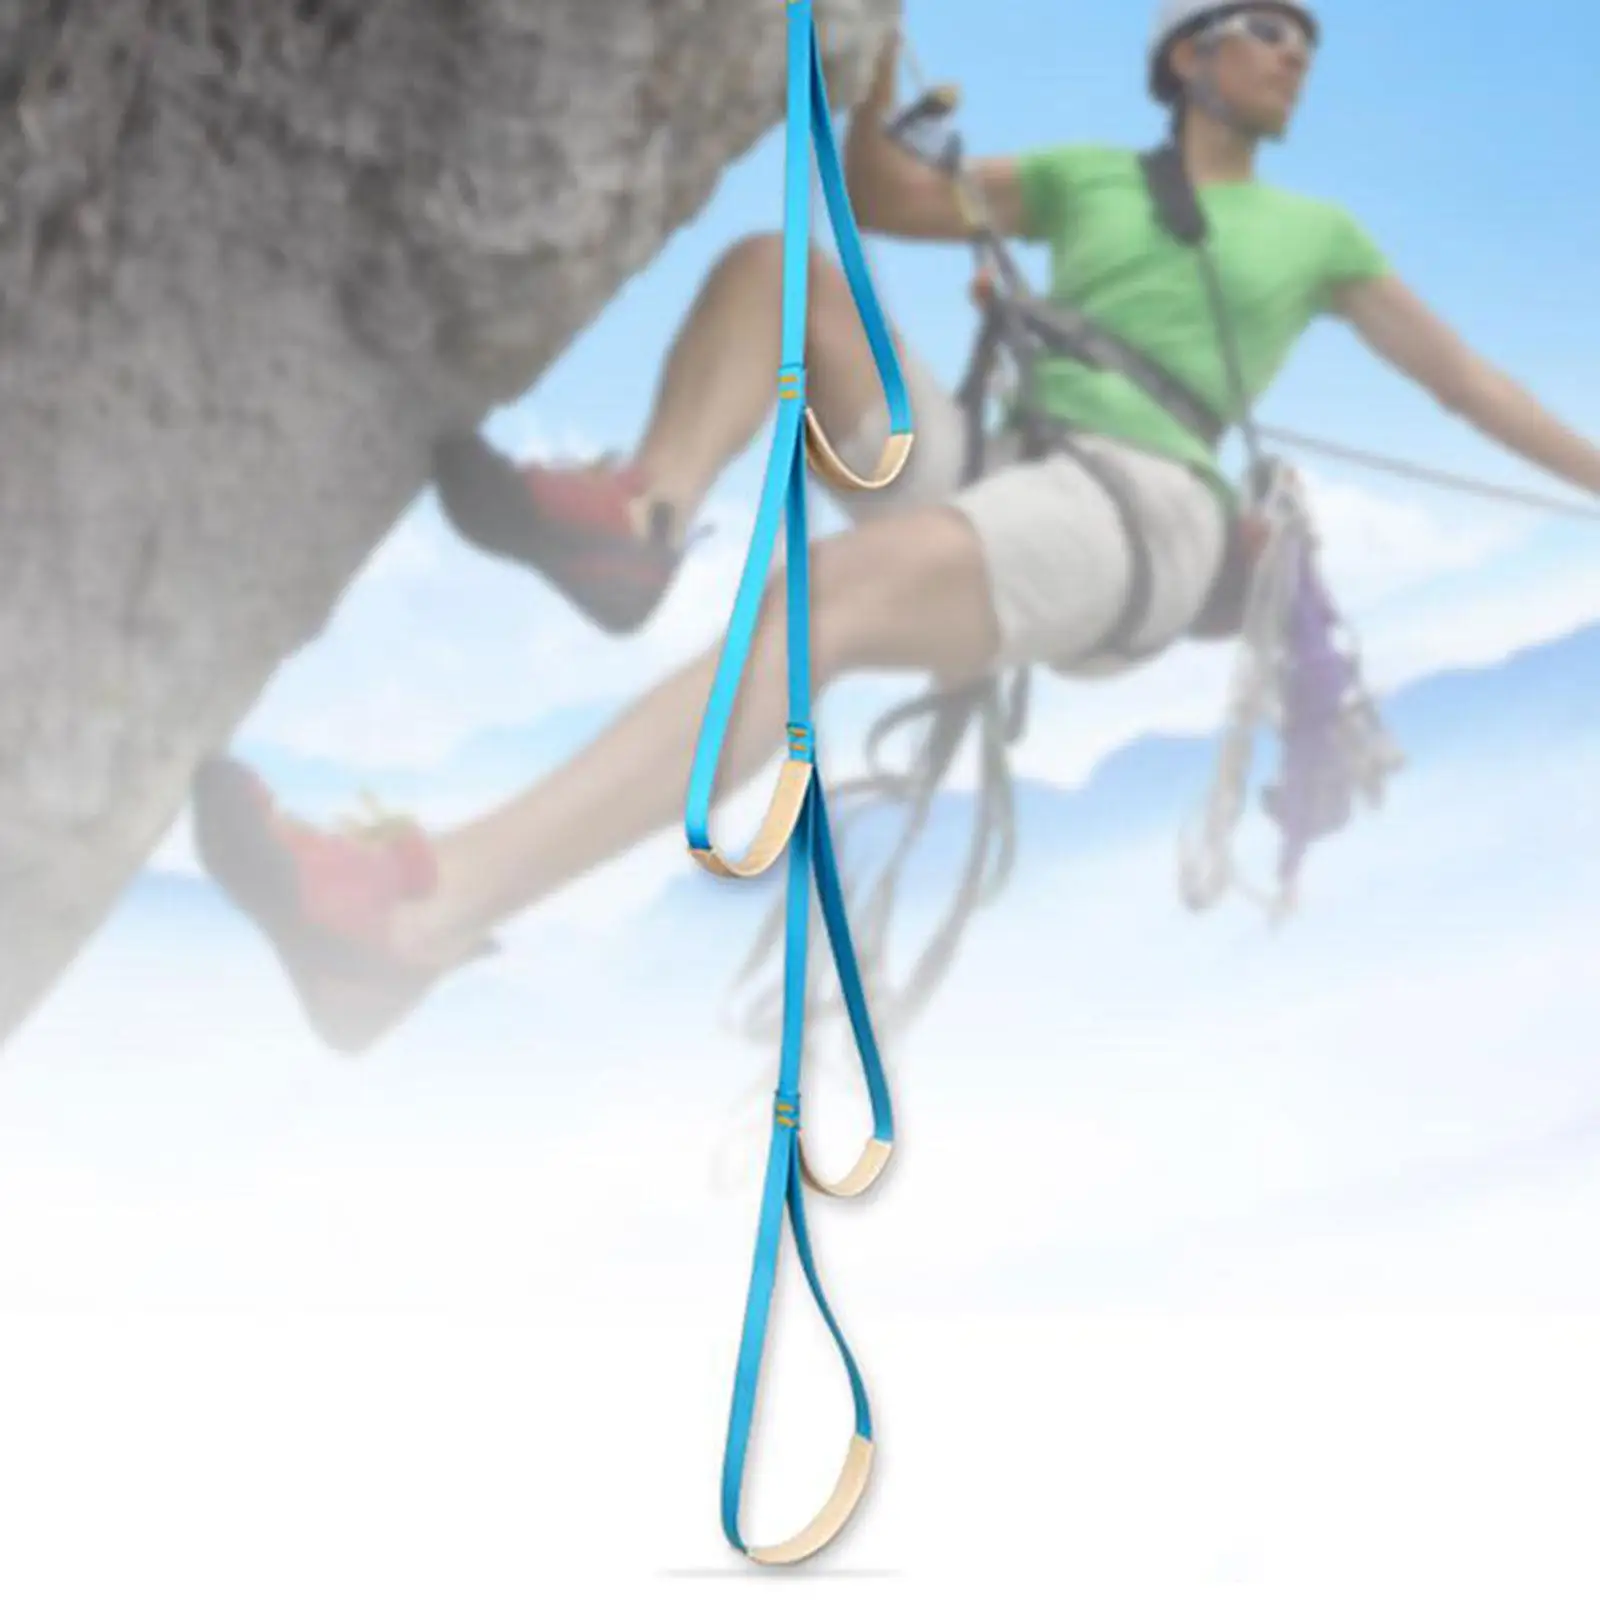 4 steps Climbing Rope Ladder Wear Resistant Webbing Ladder 3.6ft Climbing Strap Ladder for Caving